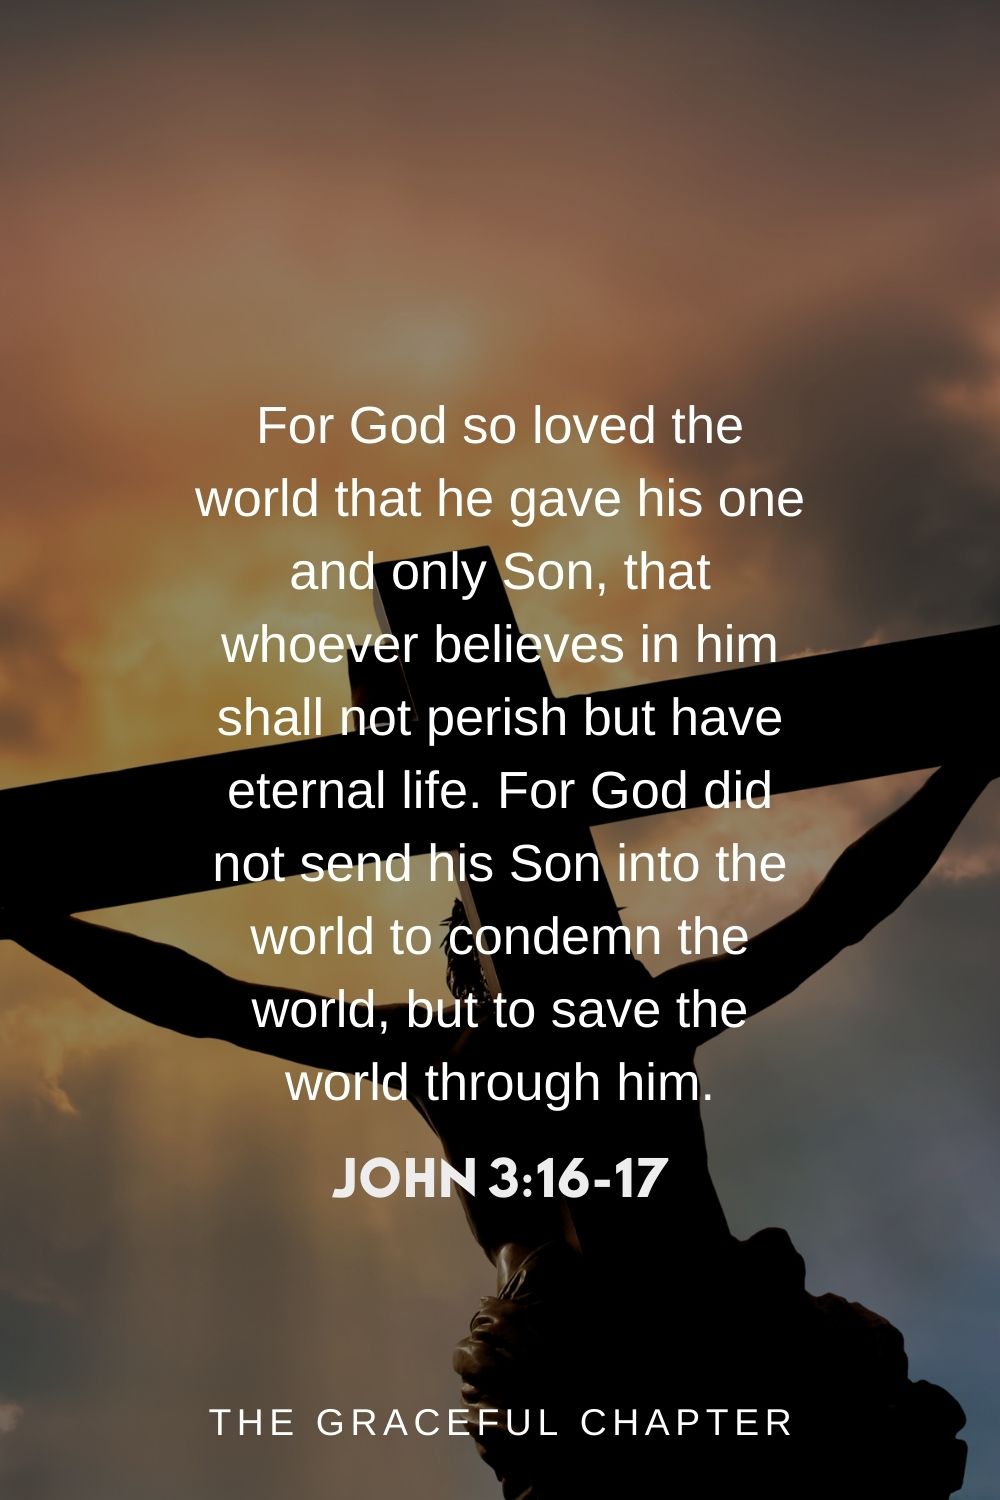 For God so loved the world that he gave his one and only Son, that whoever believes in him shall not perish but have eternal life.  John 3:16